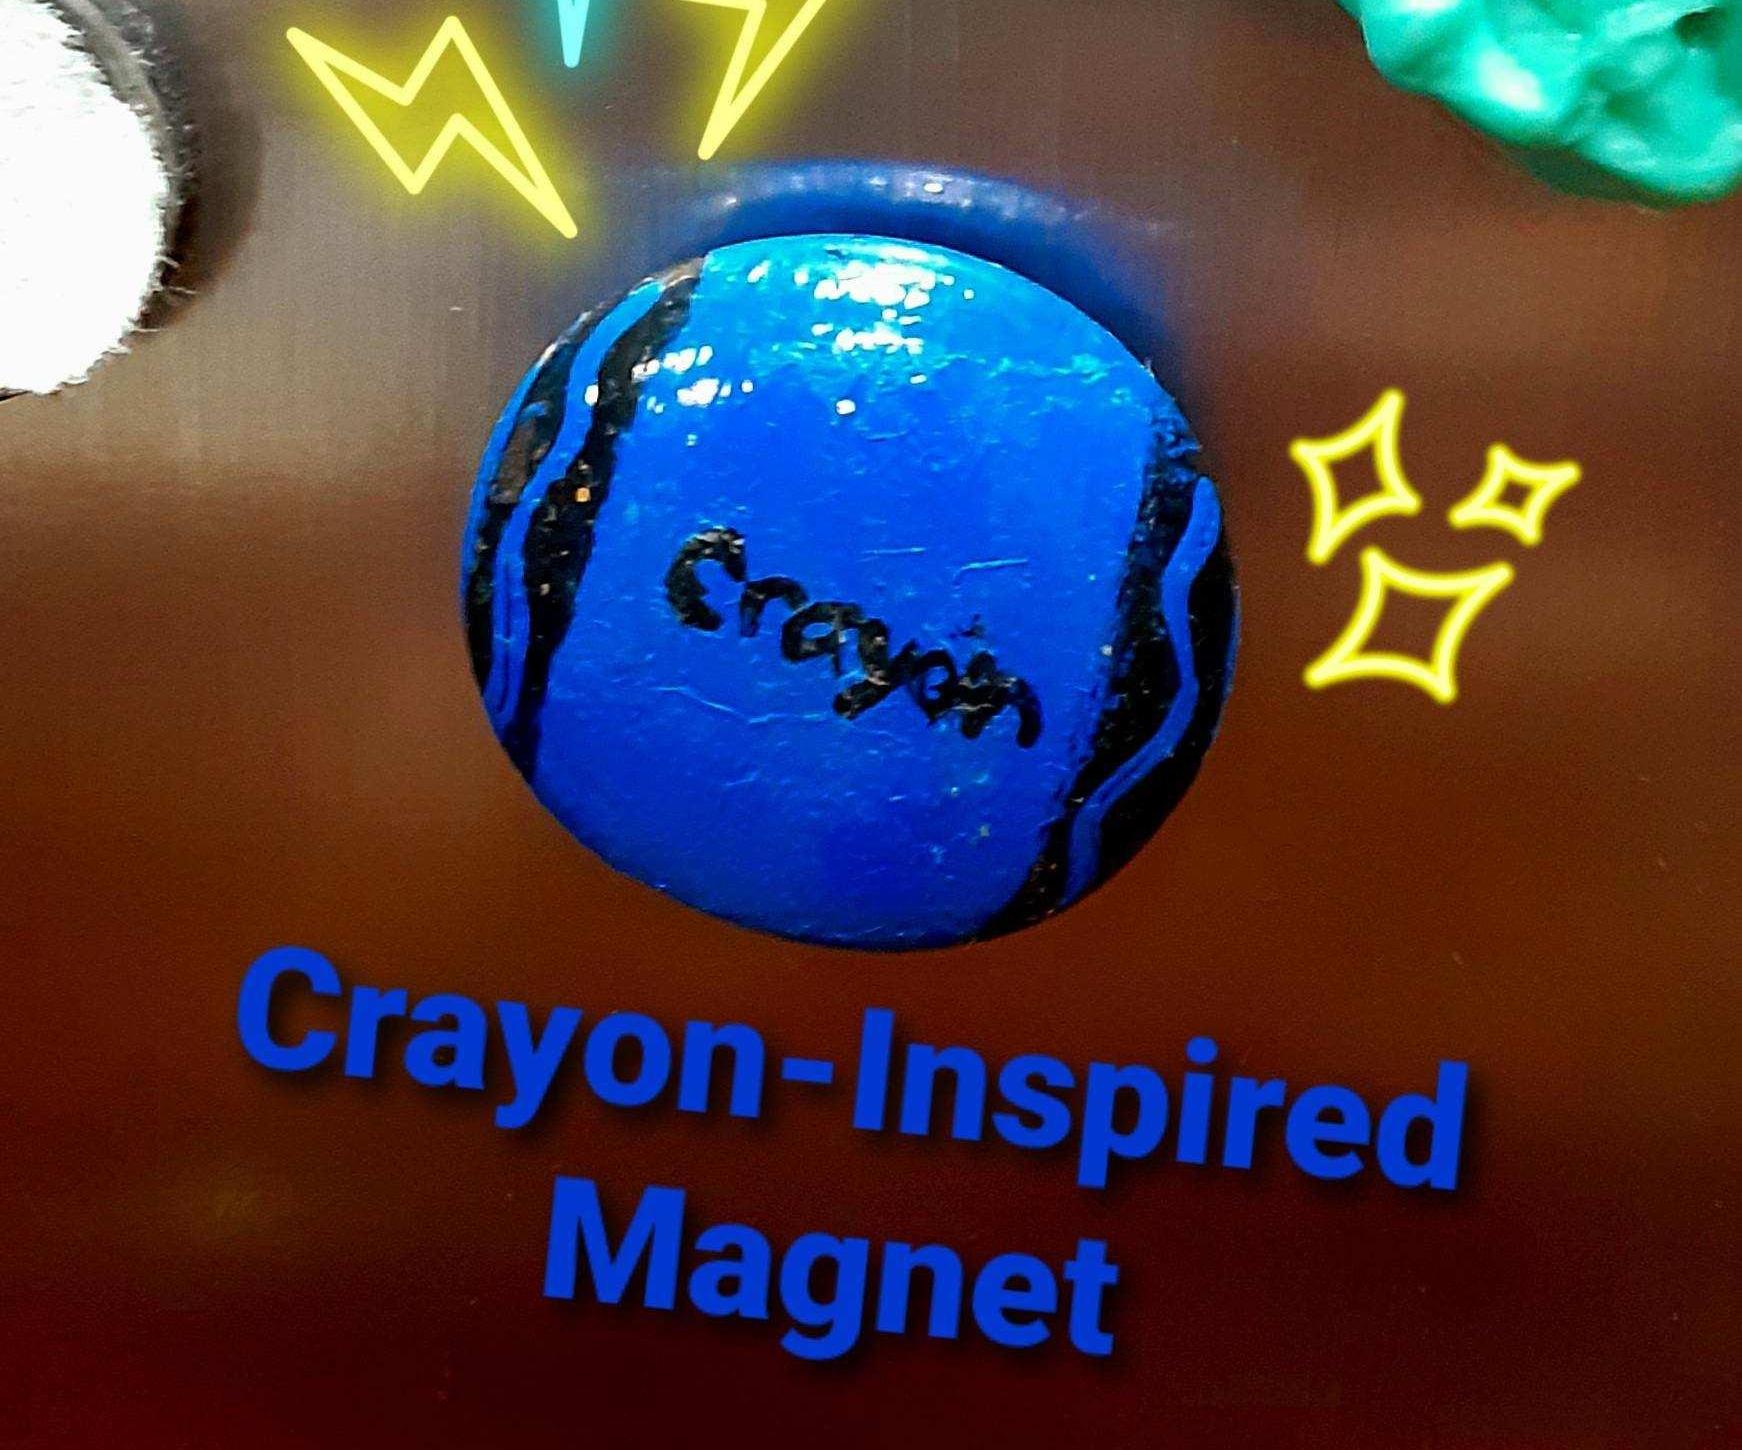 Crayon-Inspired Magnet